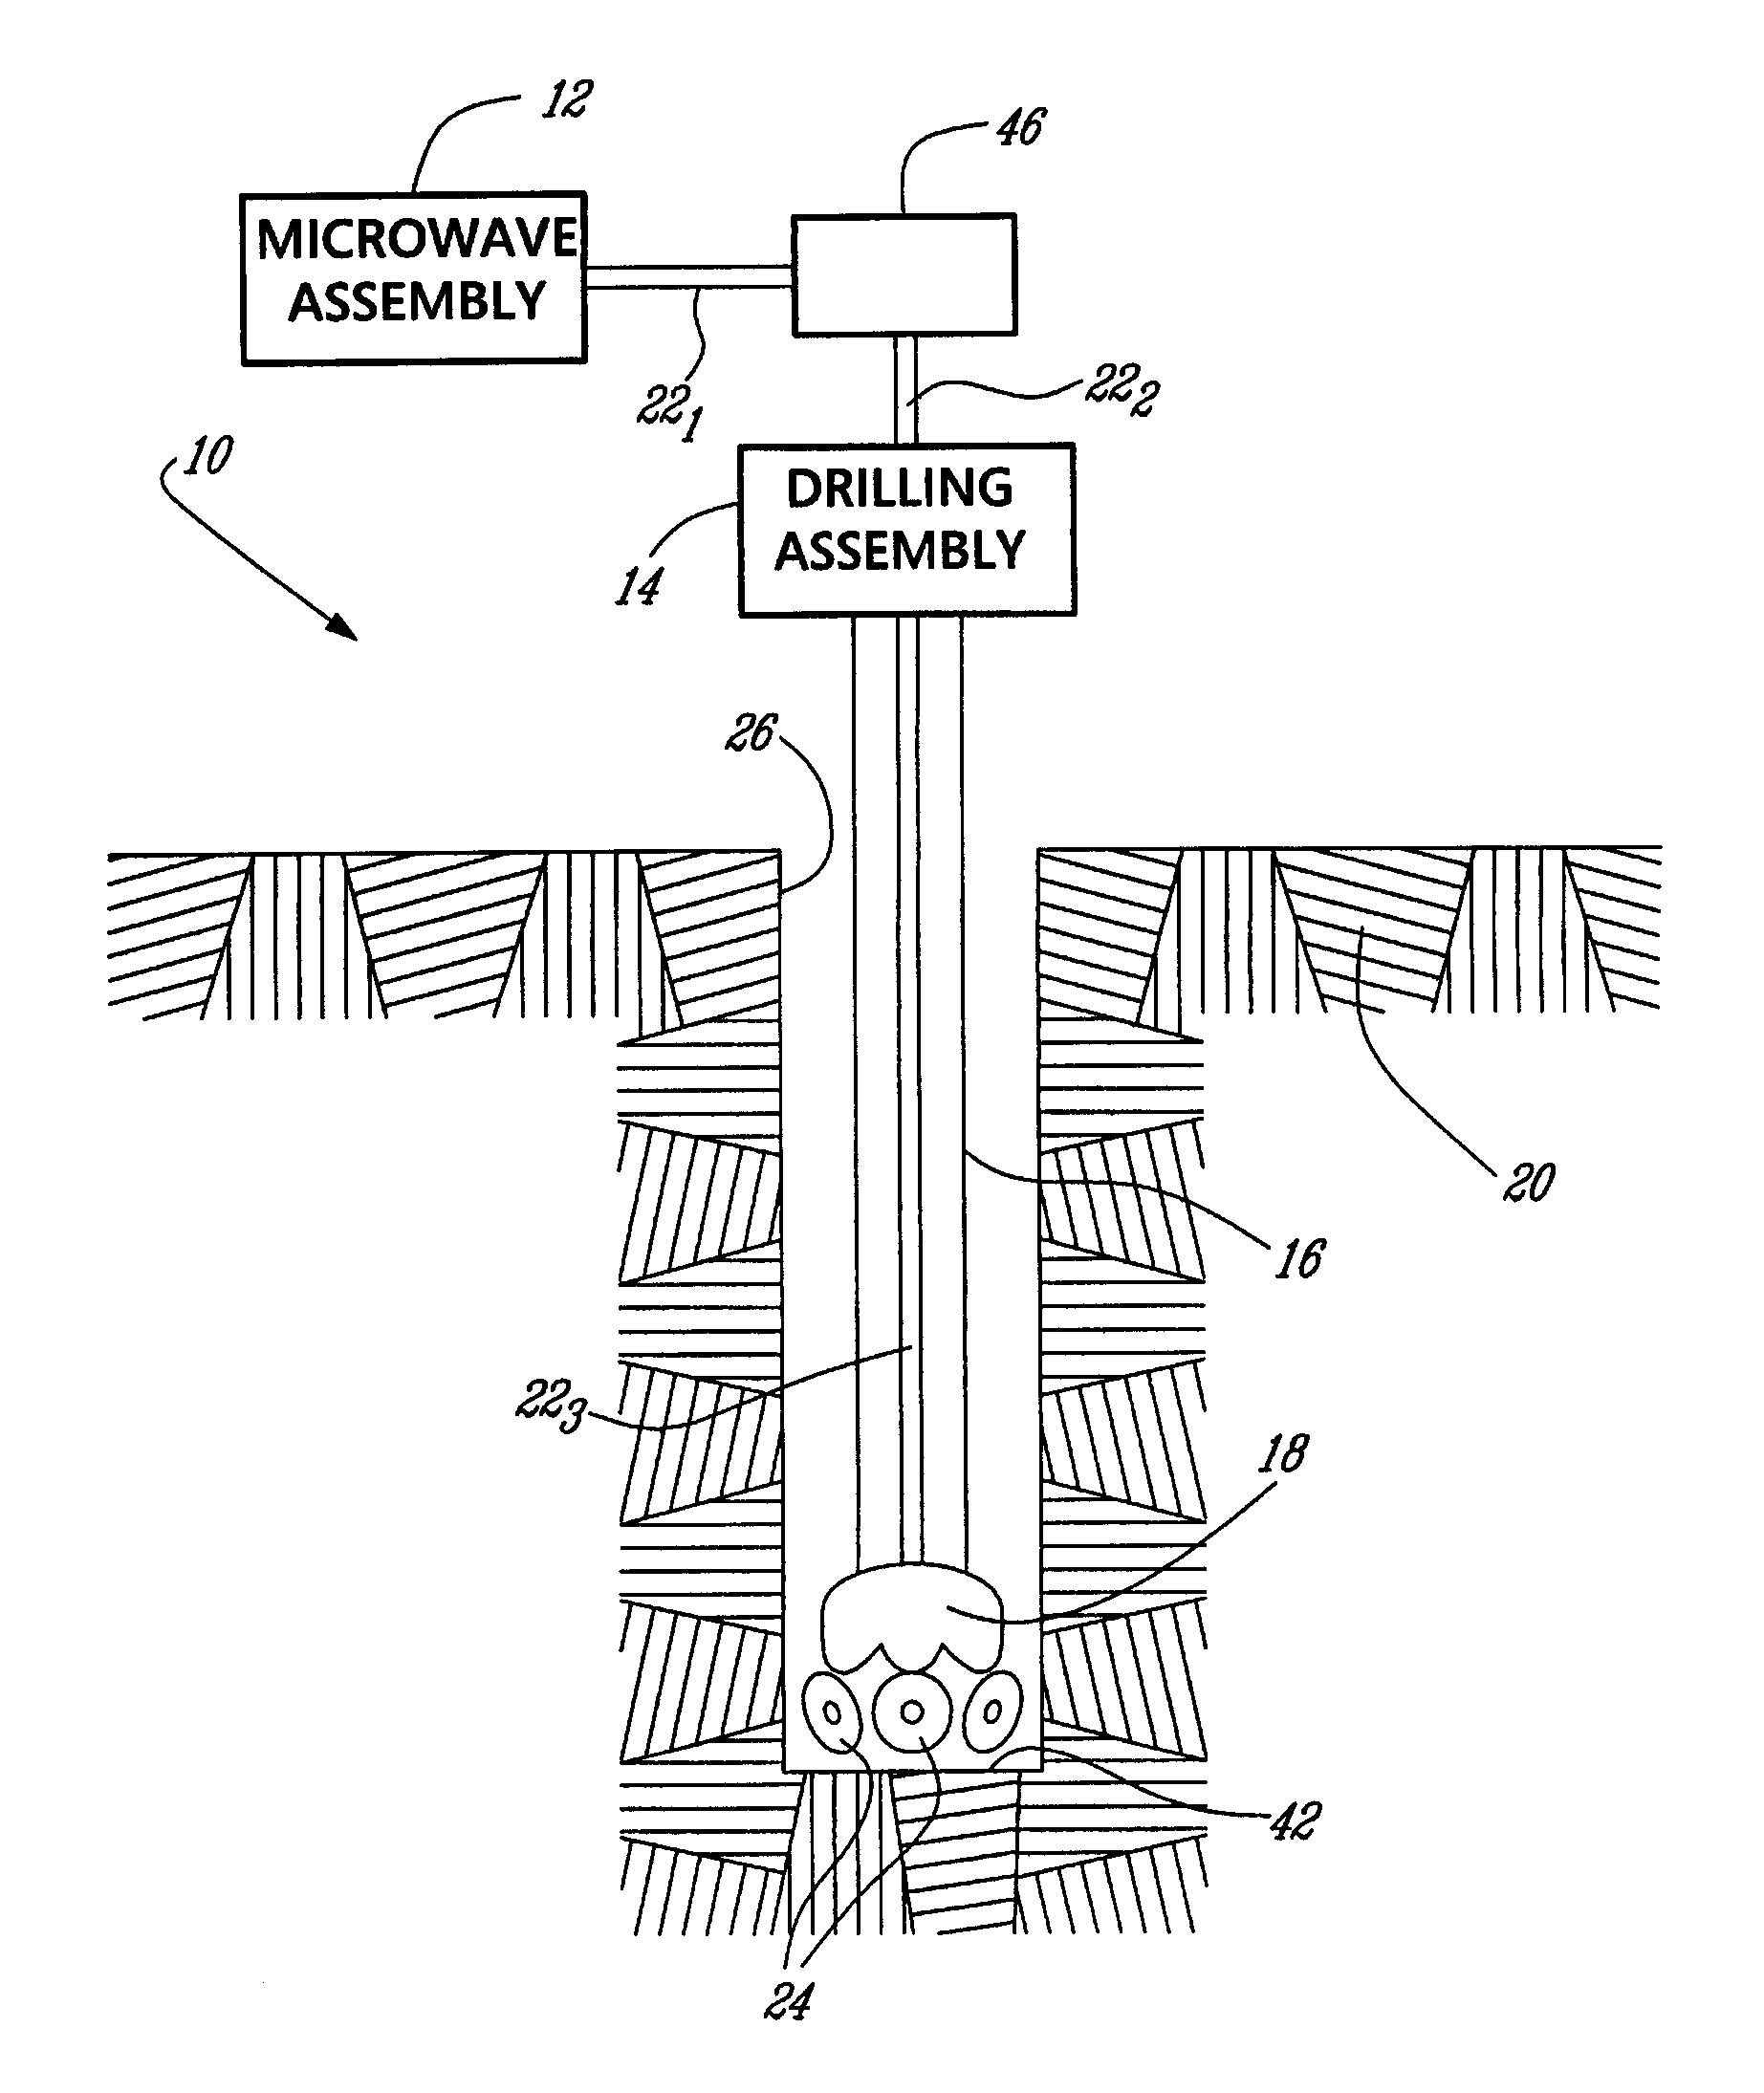 Electromagnetic energy assisted drilling system and method